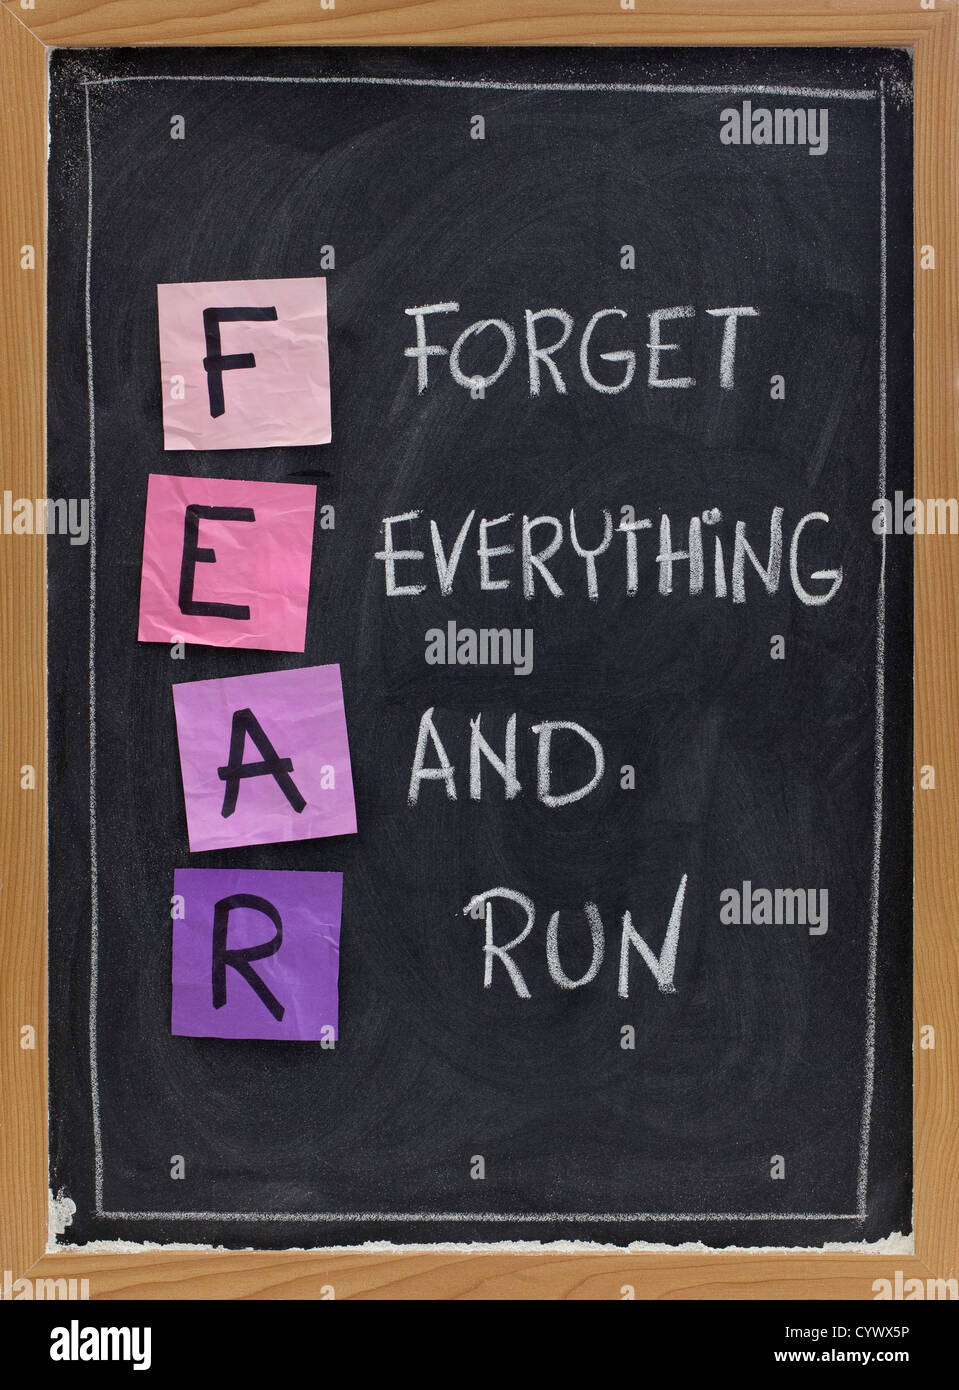 forget everything and run - FEAR acronym, shutting down or panic response concept Stock Photo